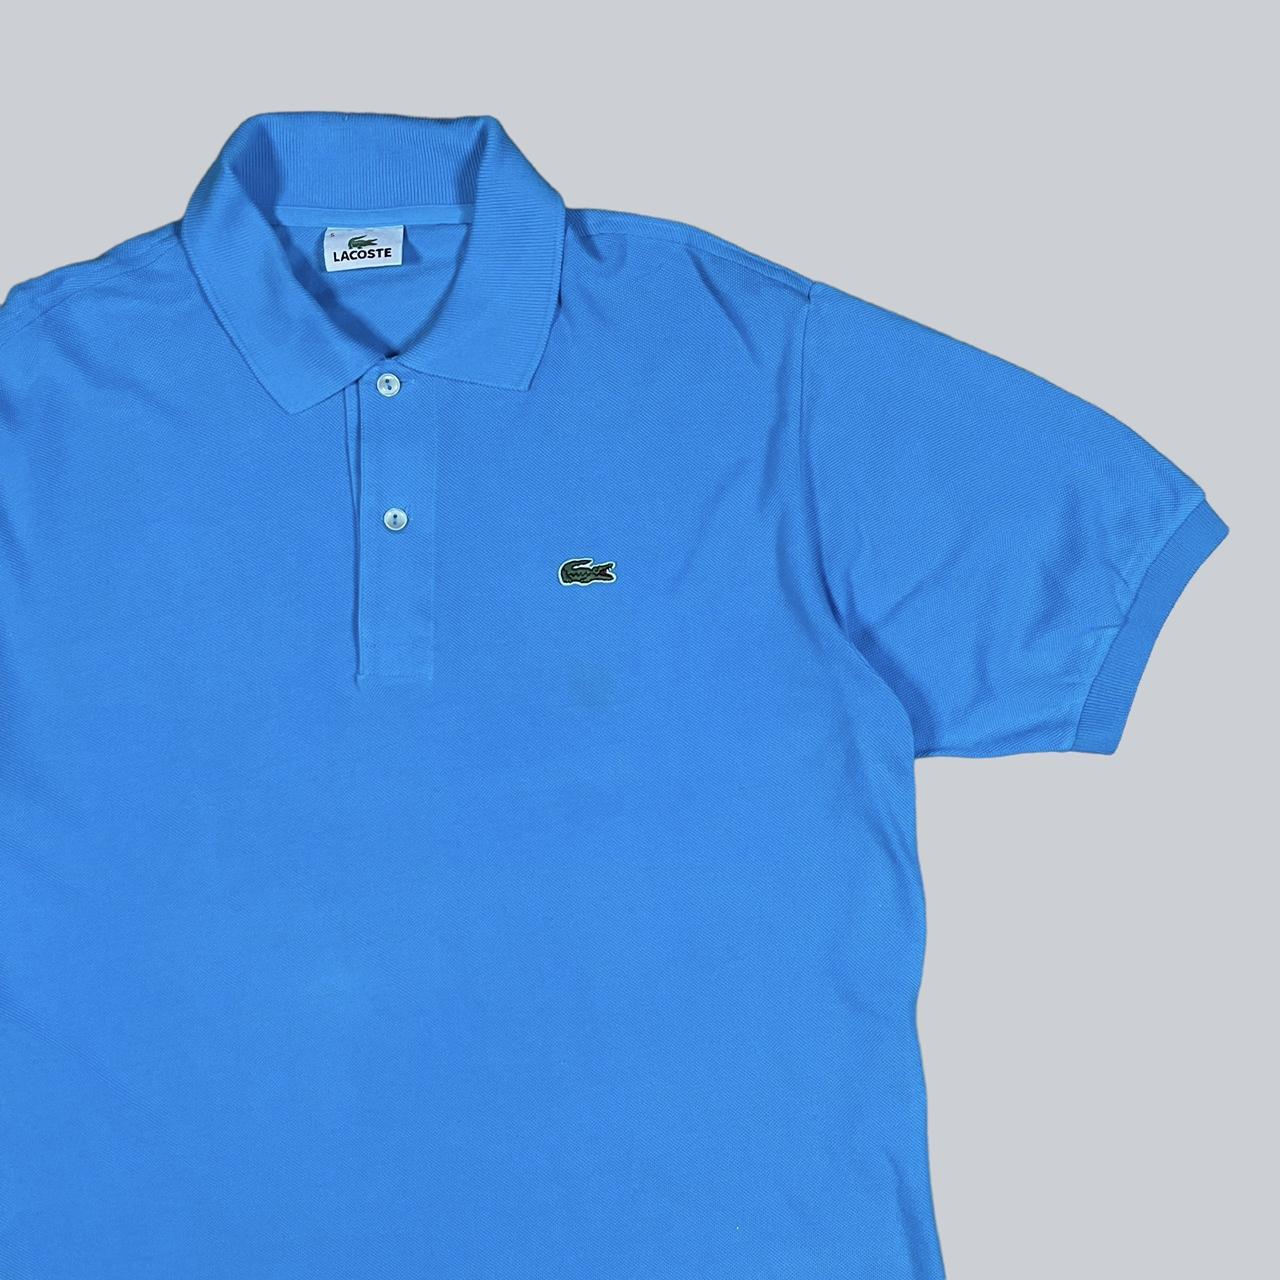 Lacoste Polo Shirt in blue Recommended Size Large... - Depop